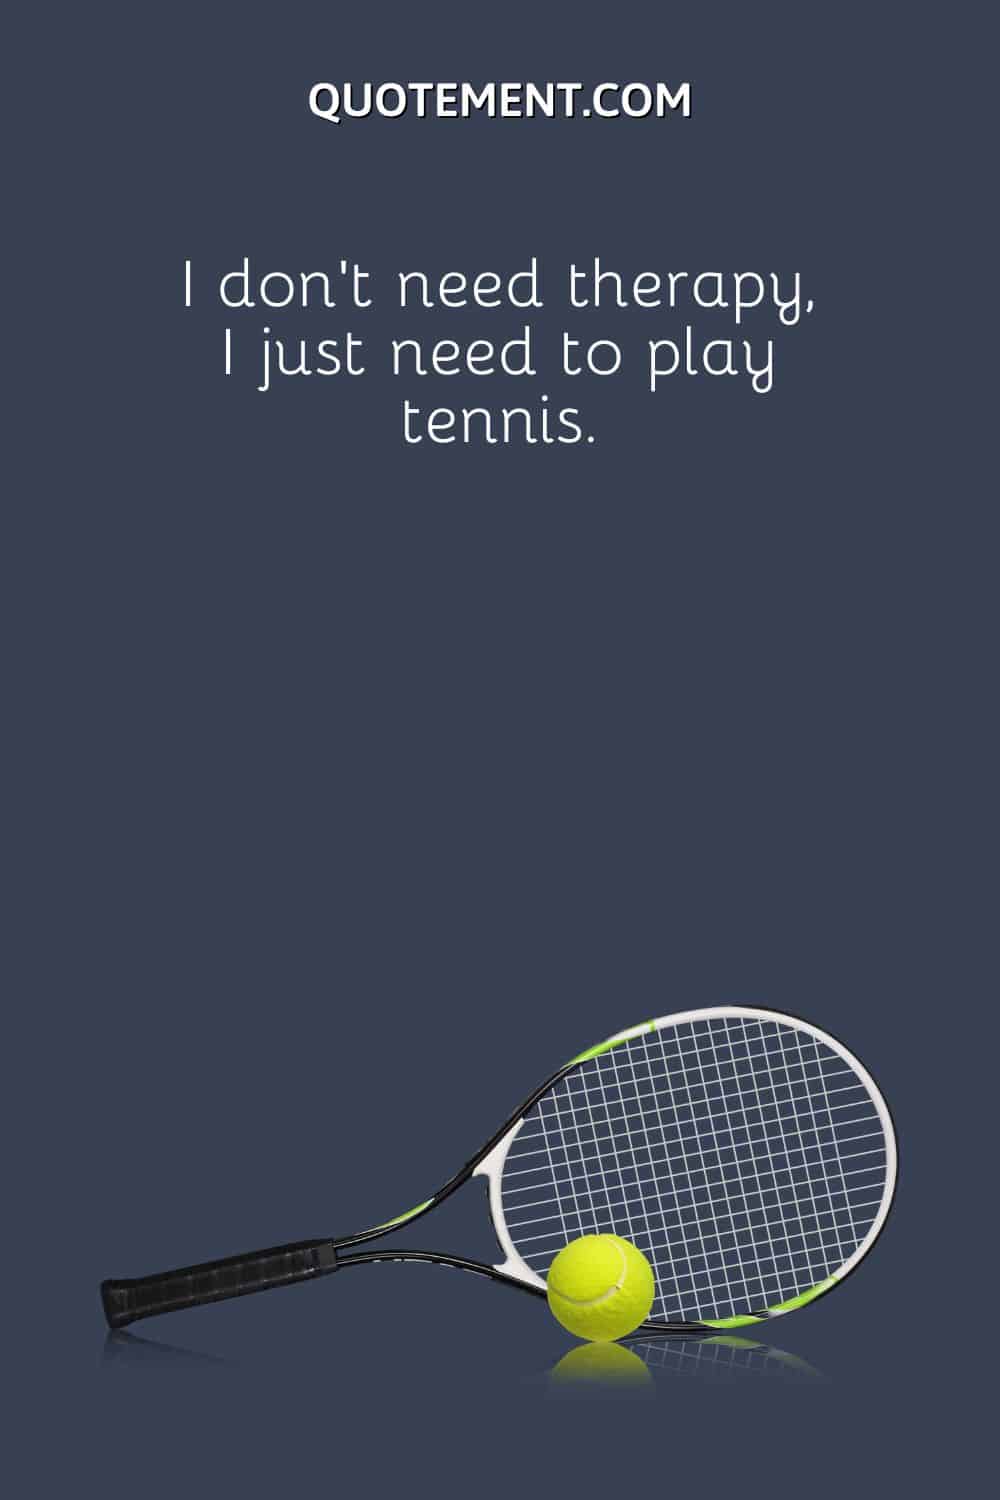 I don’t need therapy, I just need to play tennis.